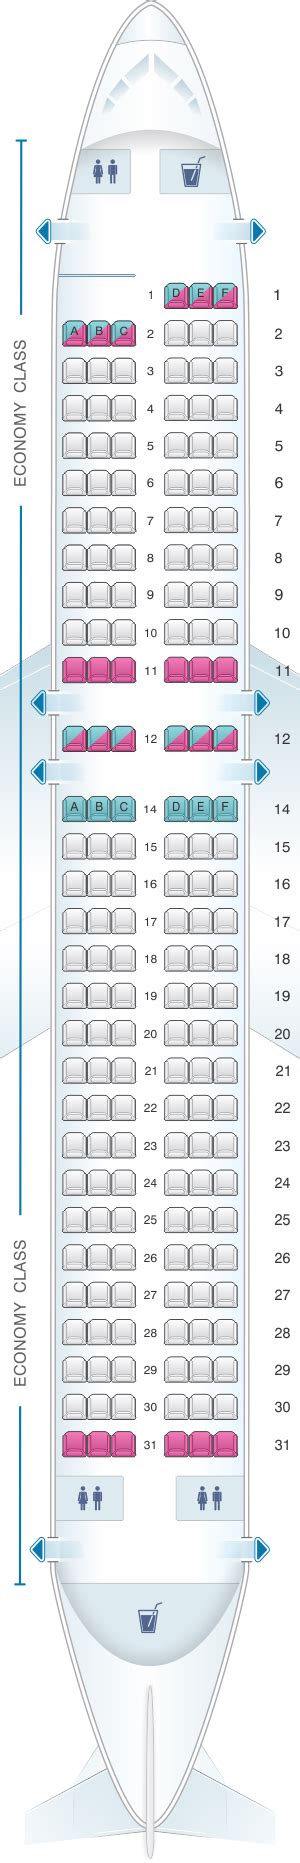 Allegiant a320 seat map. Seats 180. Pitch 28-29". Width 18". Recline 3". VietJet Air's economy class on the Airbus A320-200 offers a practical solution for travelers. With 180 seats, it's a blend of cost-effectiveness and essential amenities. The in-flight entertainment keeps passengers engaged, and the dedicated crew ensures a satisfactory flight experience. 